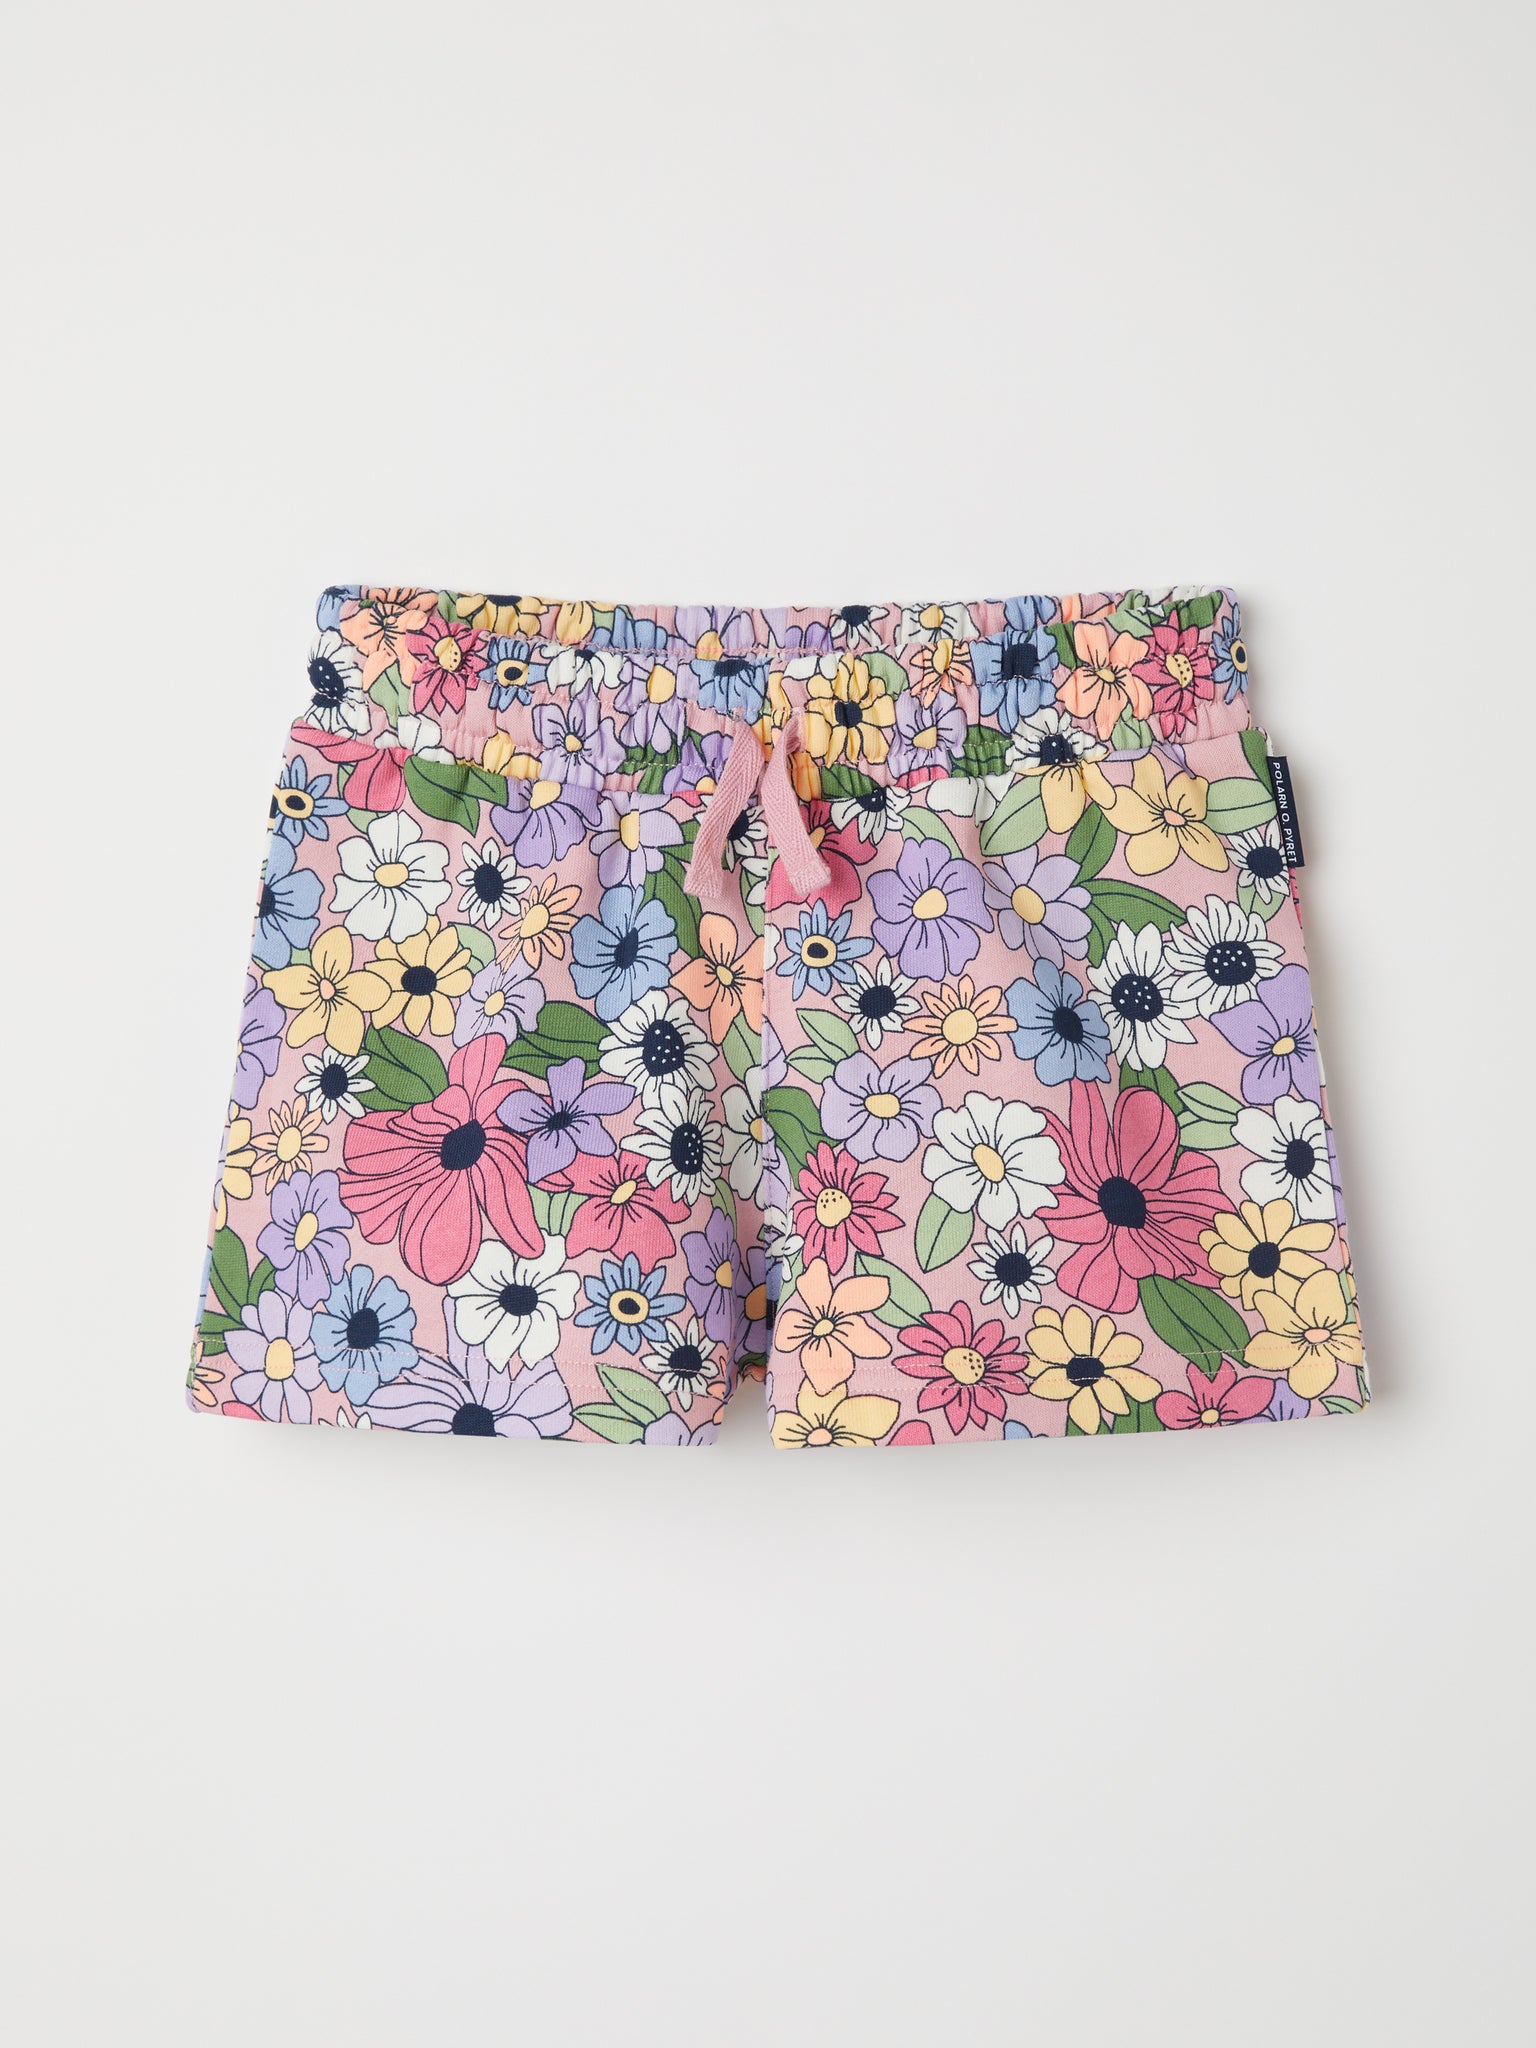 Floral Print Kids Jersey Shorts from the Polarn O. Pyret kidswear collection. The best ethical kids clothes